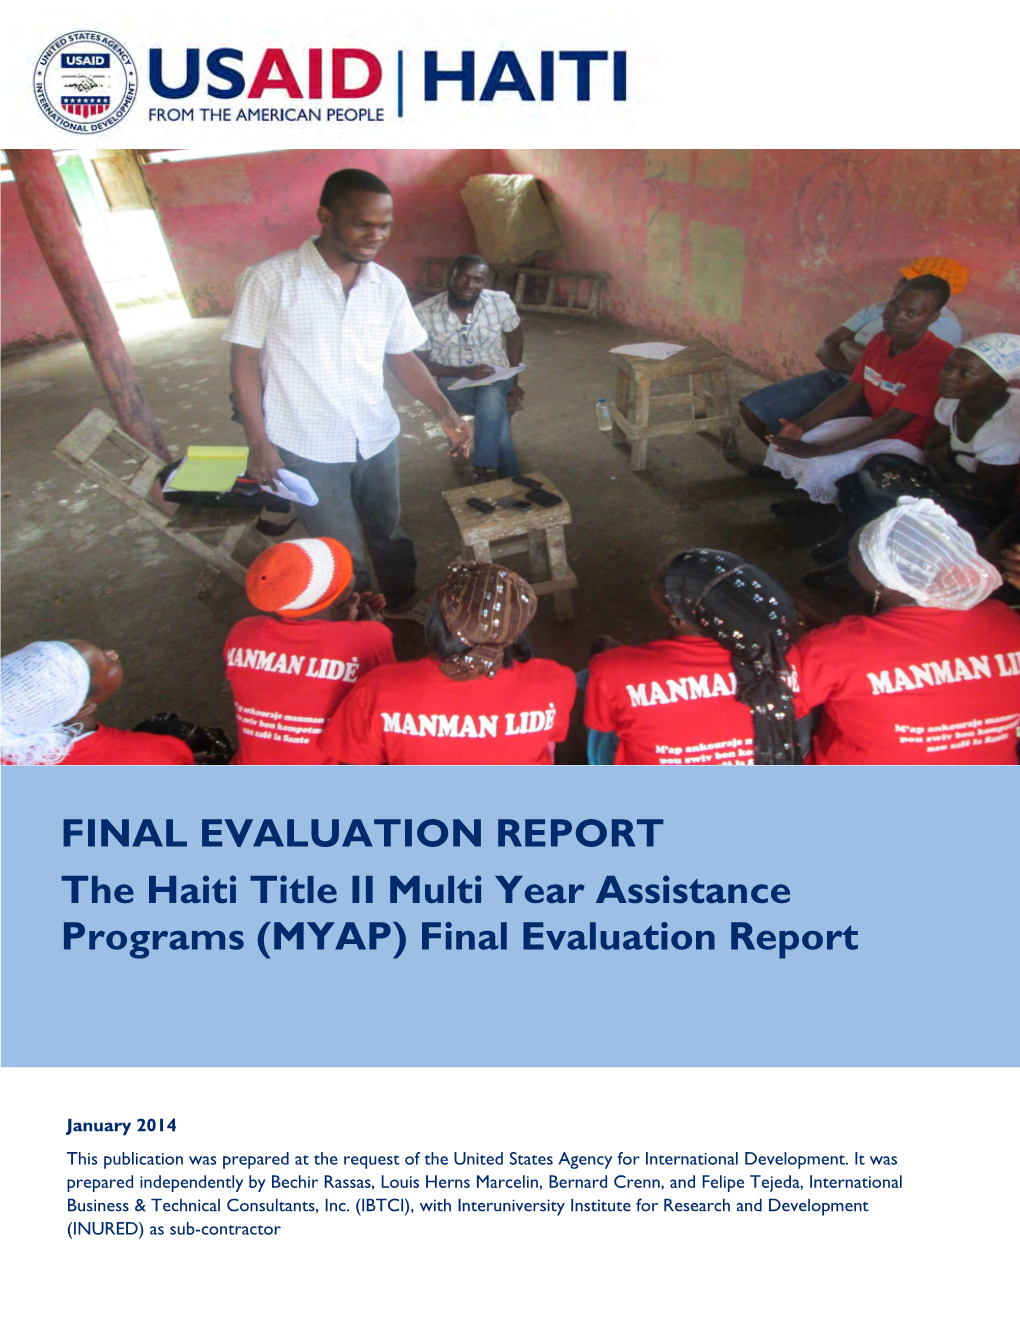 FINAL EVALUATION REPORT the Haiti Title II Multi Year Assistance Programs (MYAP) Final Evaluation Report